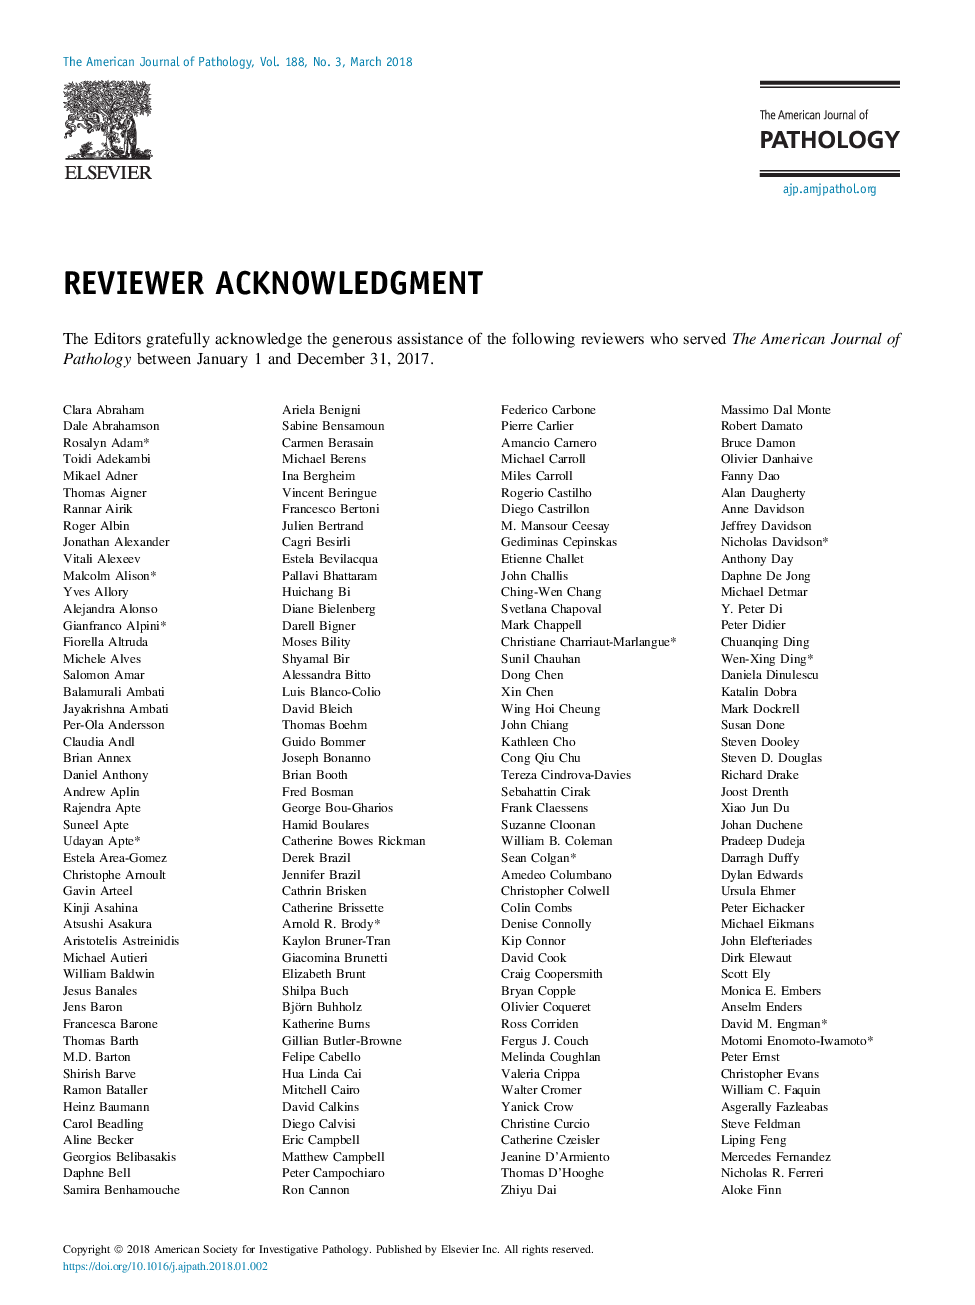 Reviewer Acknowledgment